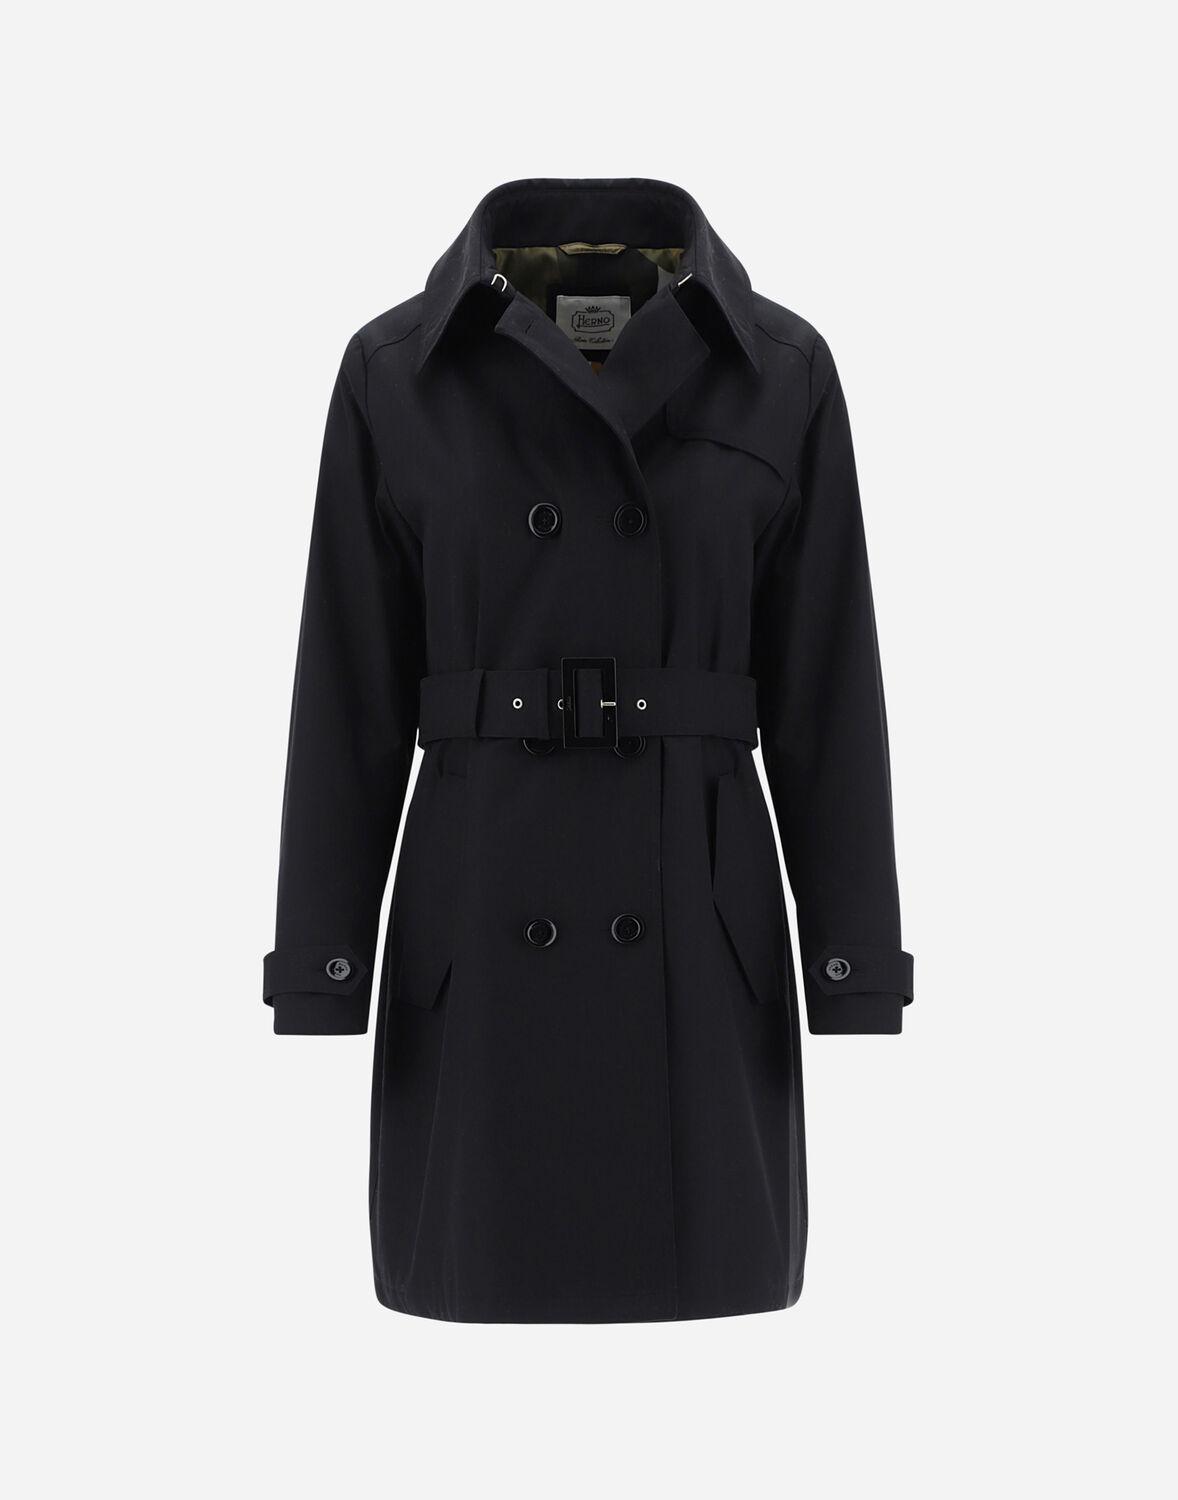 Herno Delon Double-breasted Trench Coat in Black | Lyst